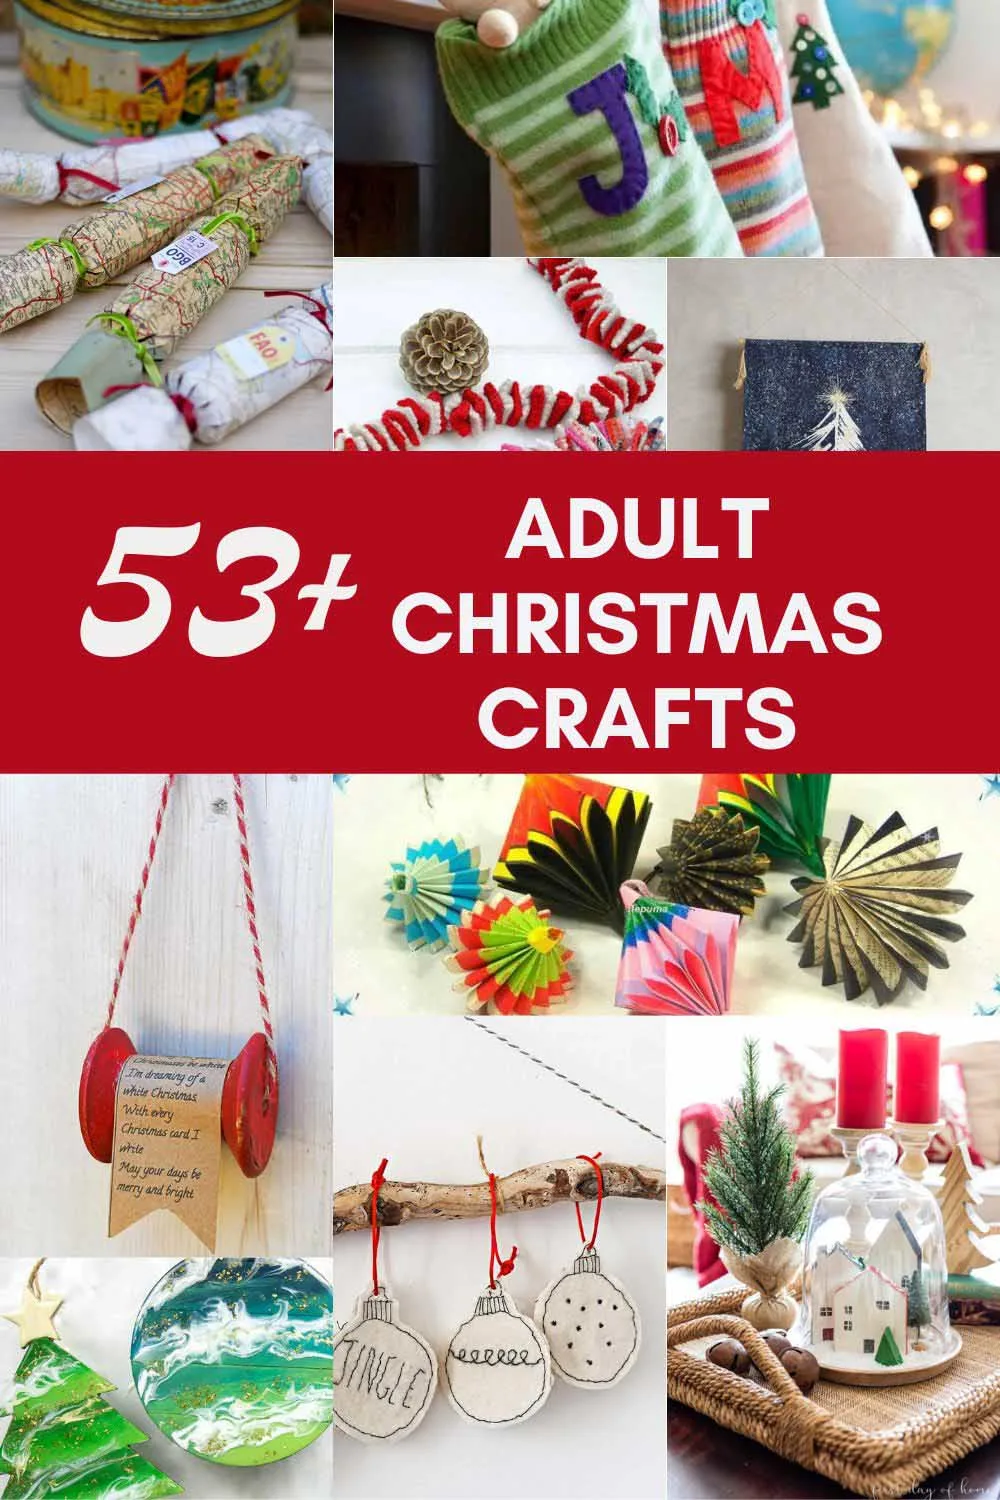 61 Easy Christmas Crafts For Adults – You'll Want To Make - Pillar Box Blue